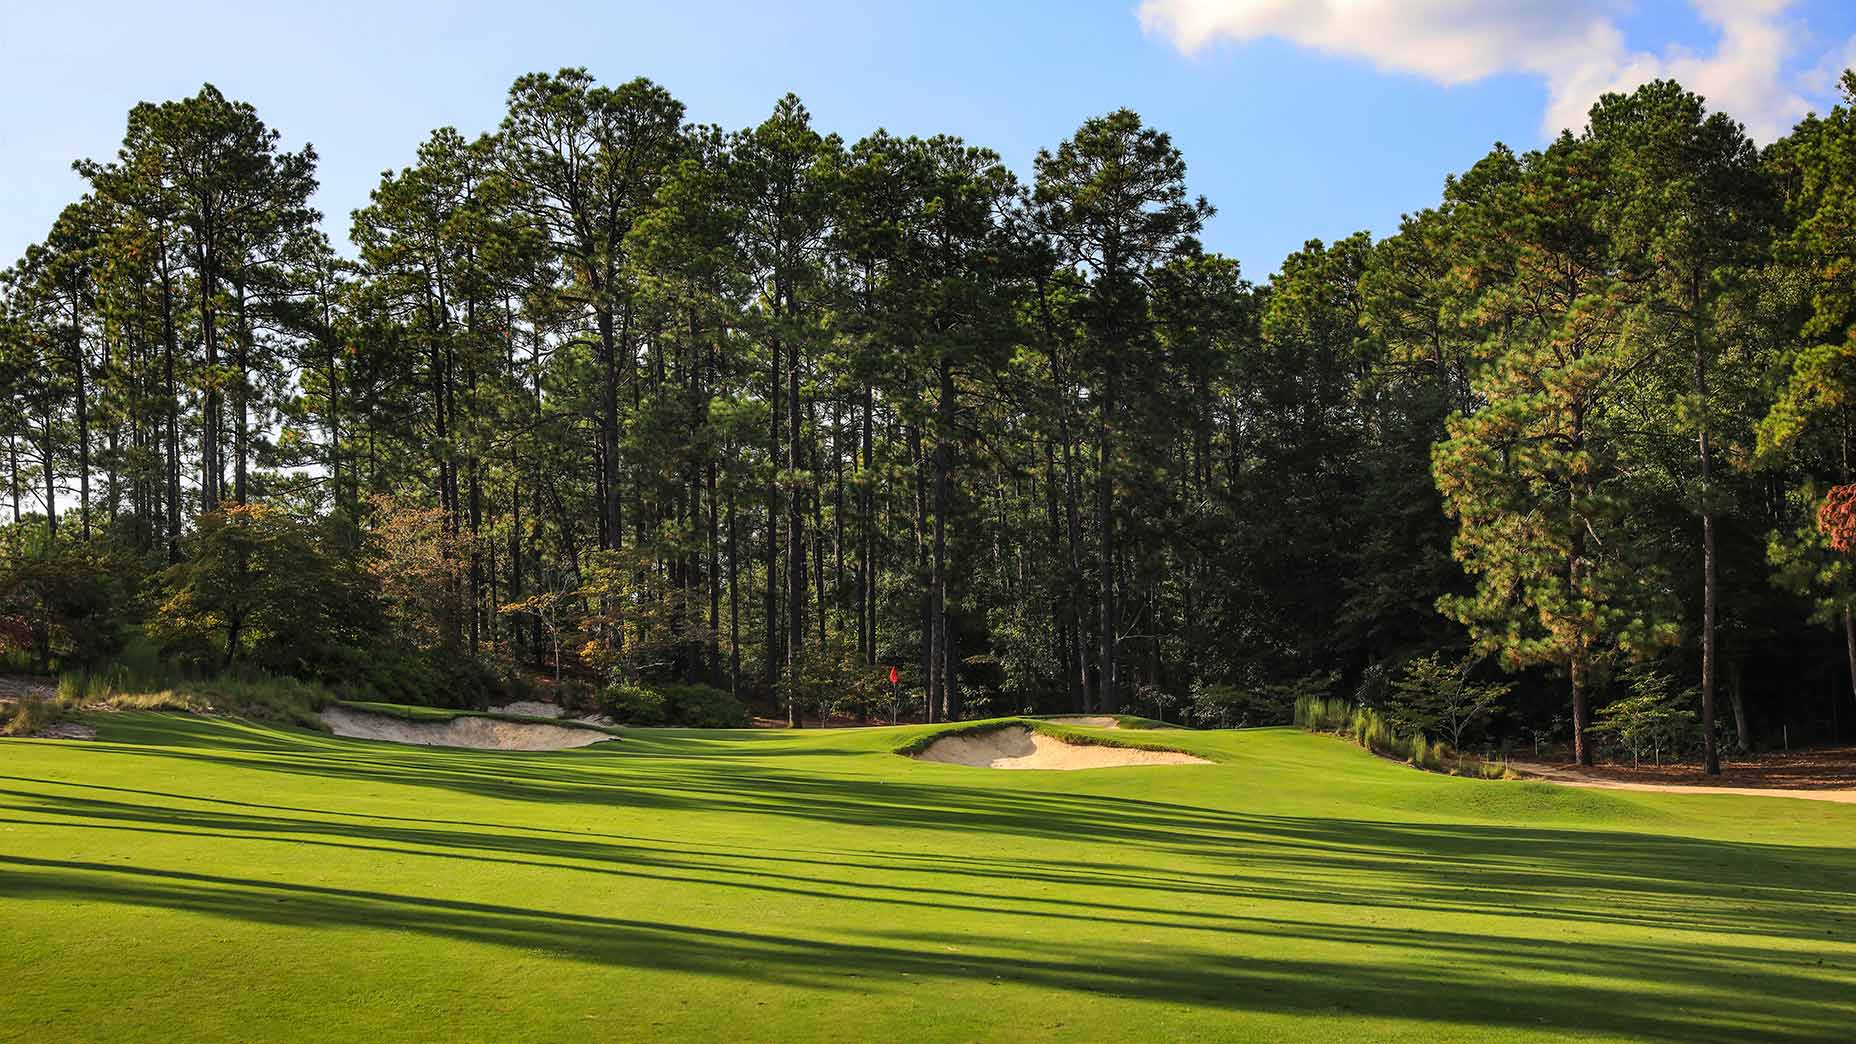 The 14th hole at Mid Pines